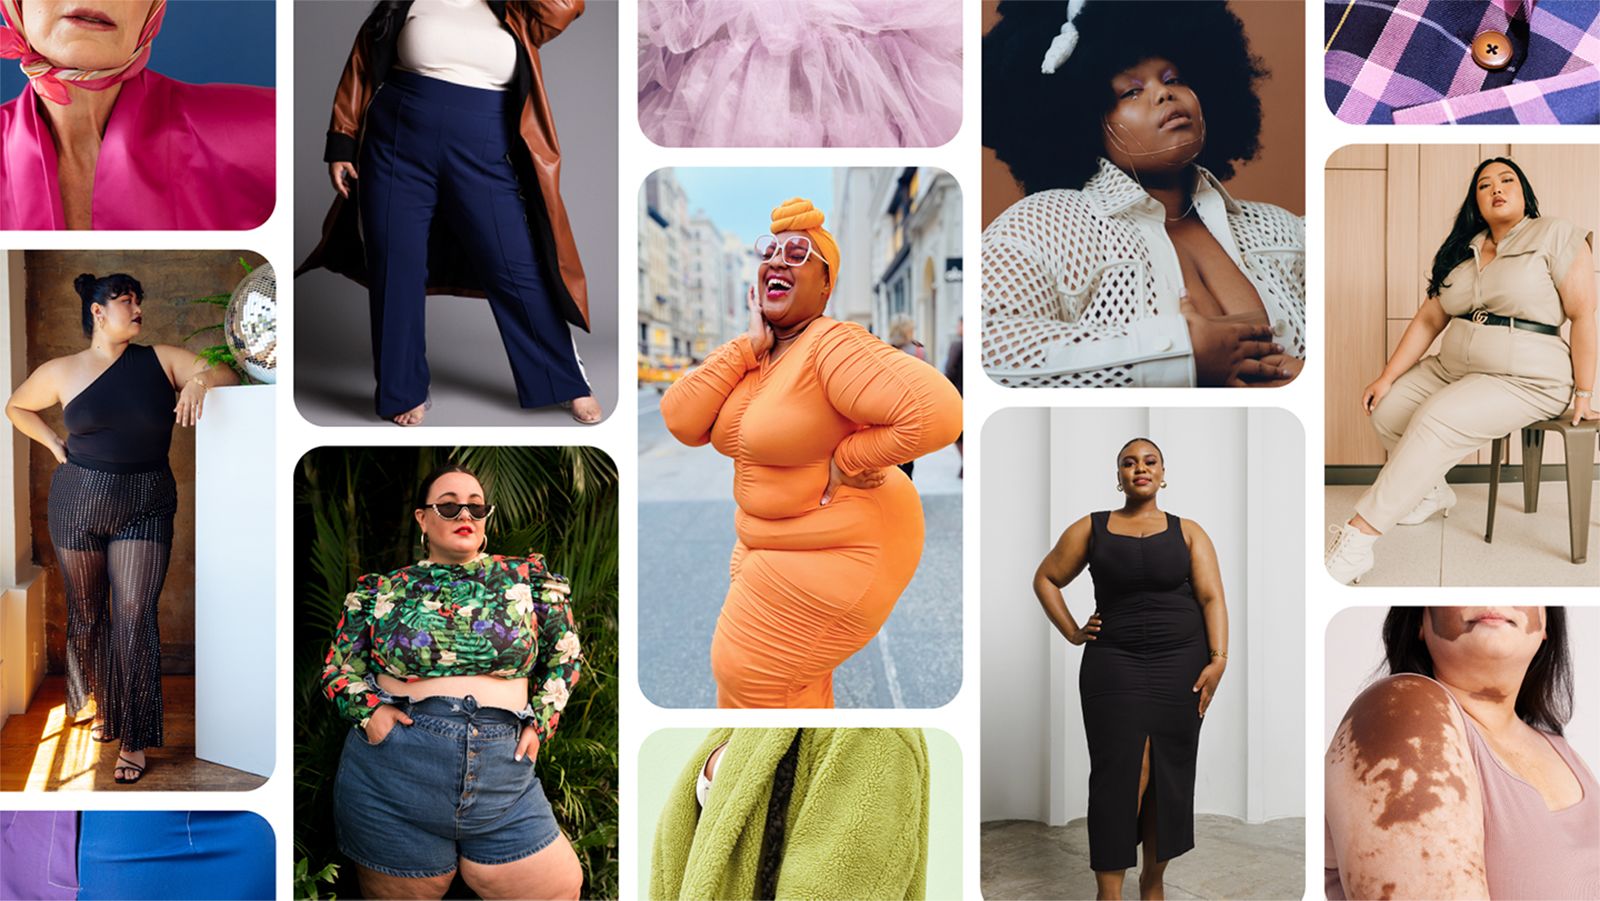 Pinterest is embracing body inclusivity in its search results